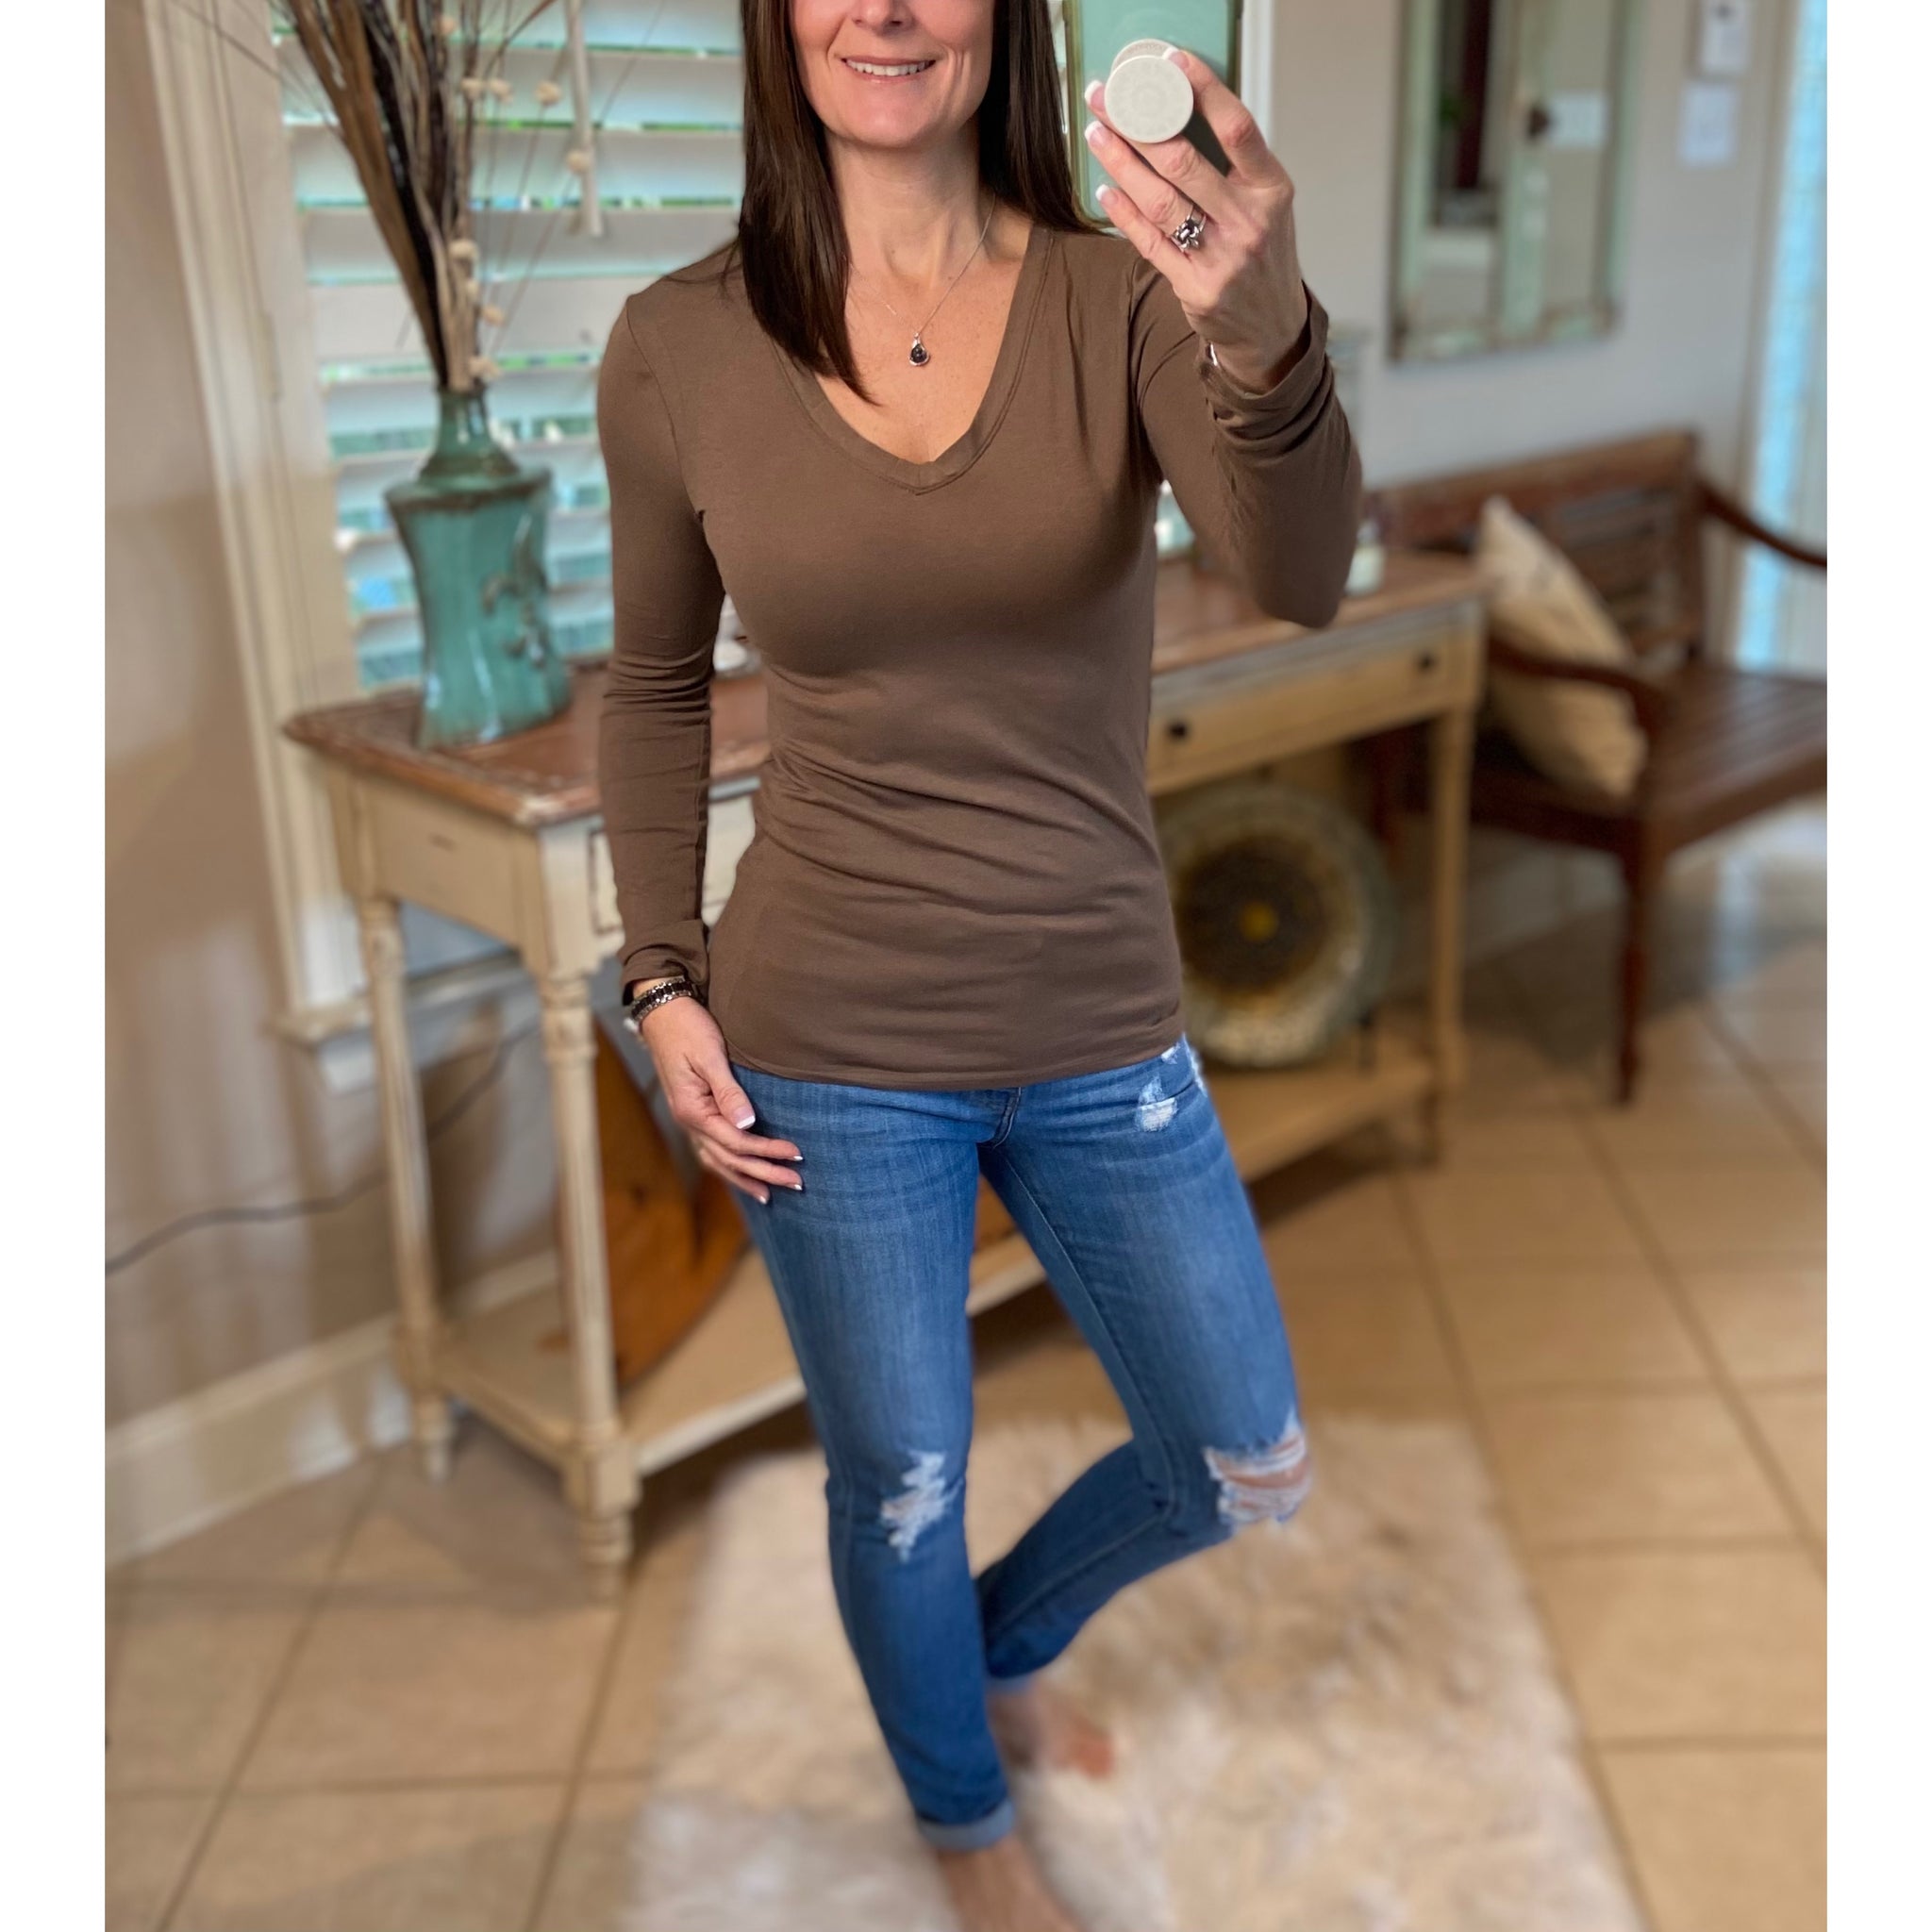 “Easygoing” Slimming V-Neck Low Cut L/S Tissue Basic Baby Shirt Top Mocha